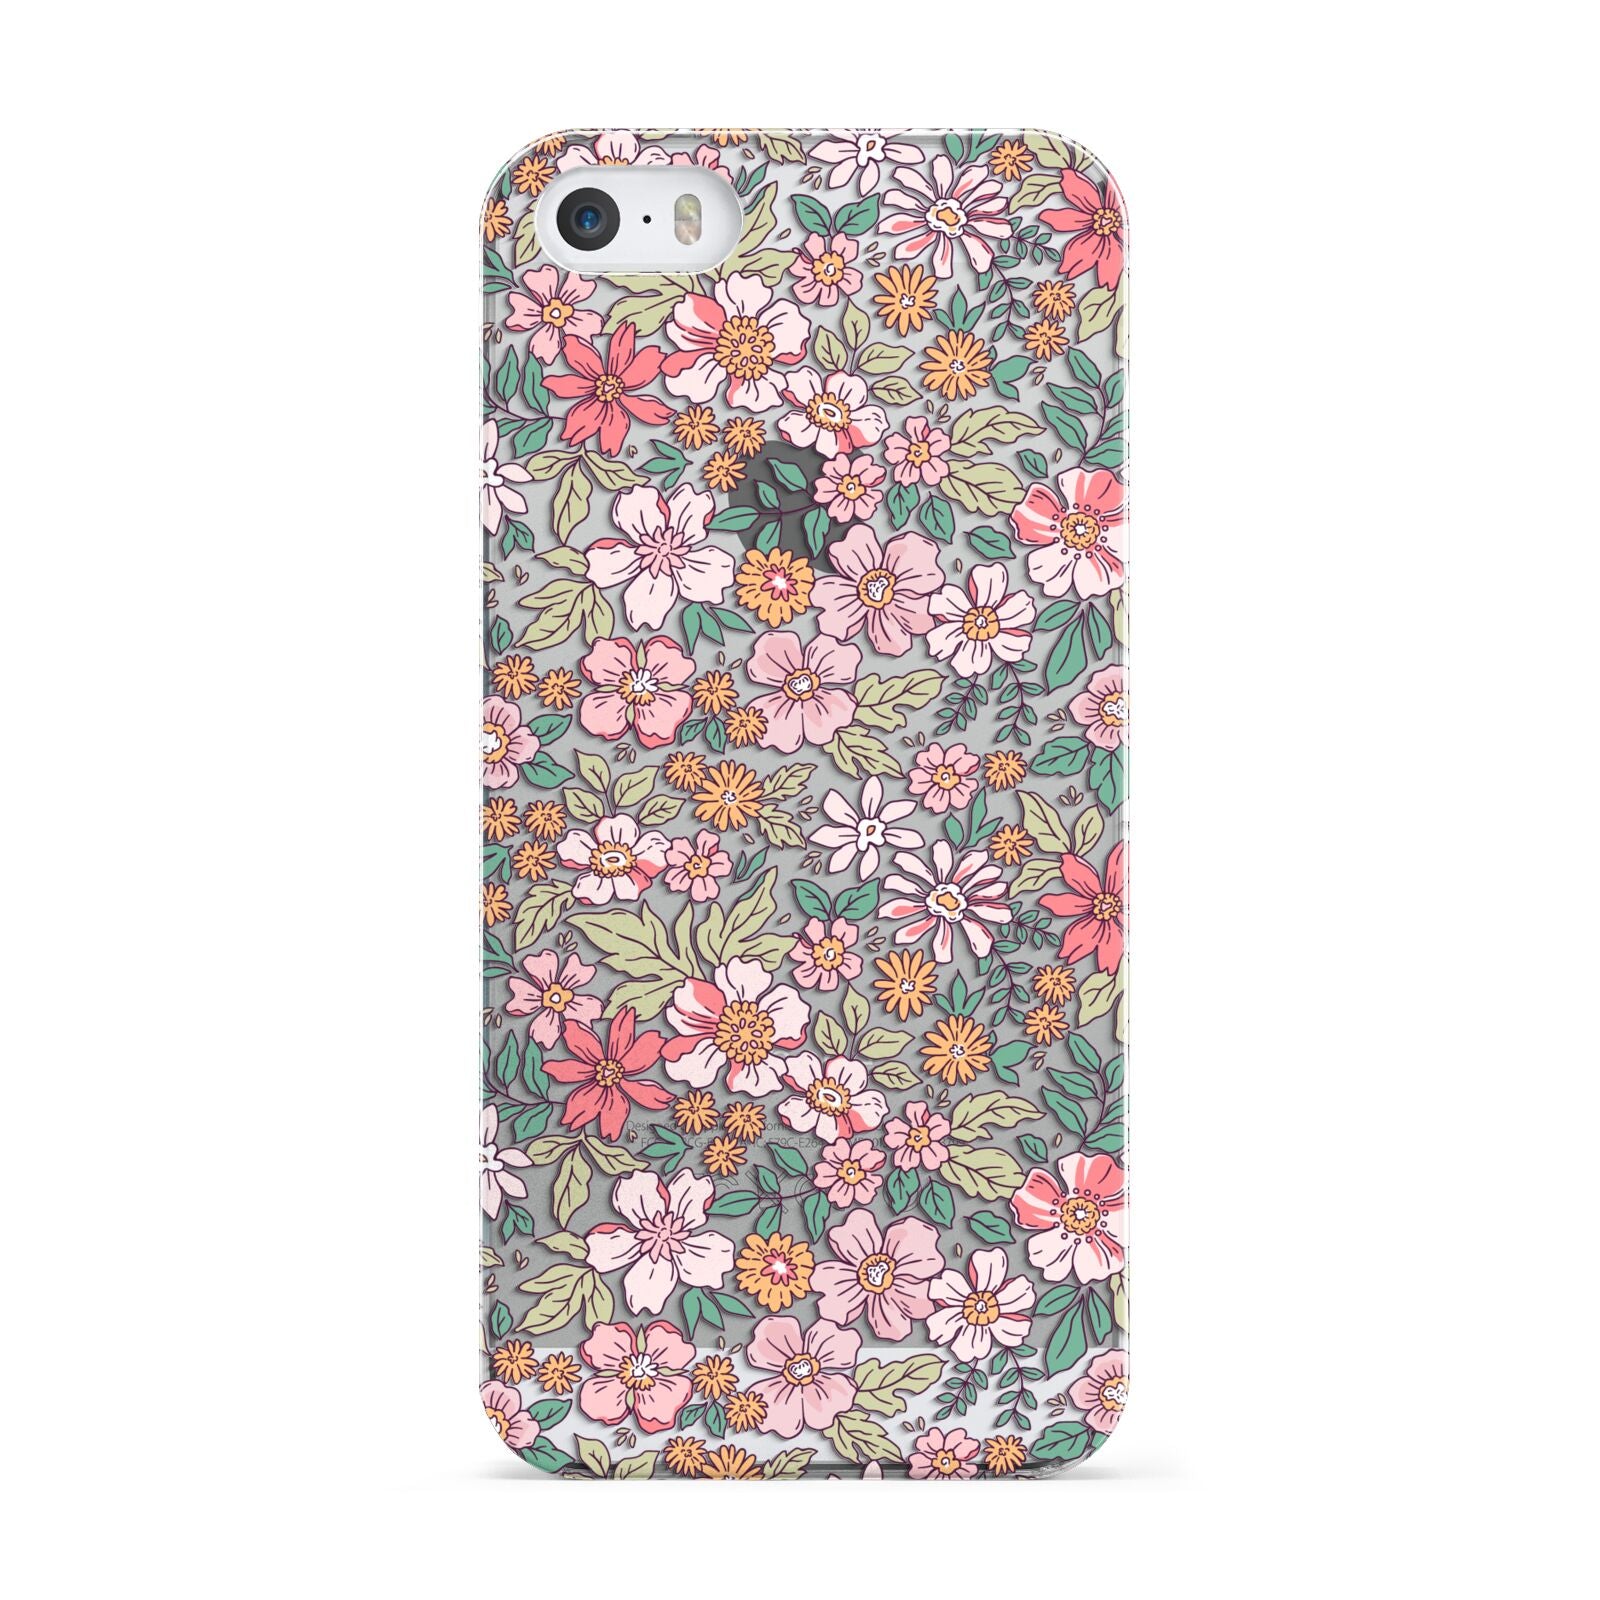 Small Floral Pattern Apple iPhone 5 Case